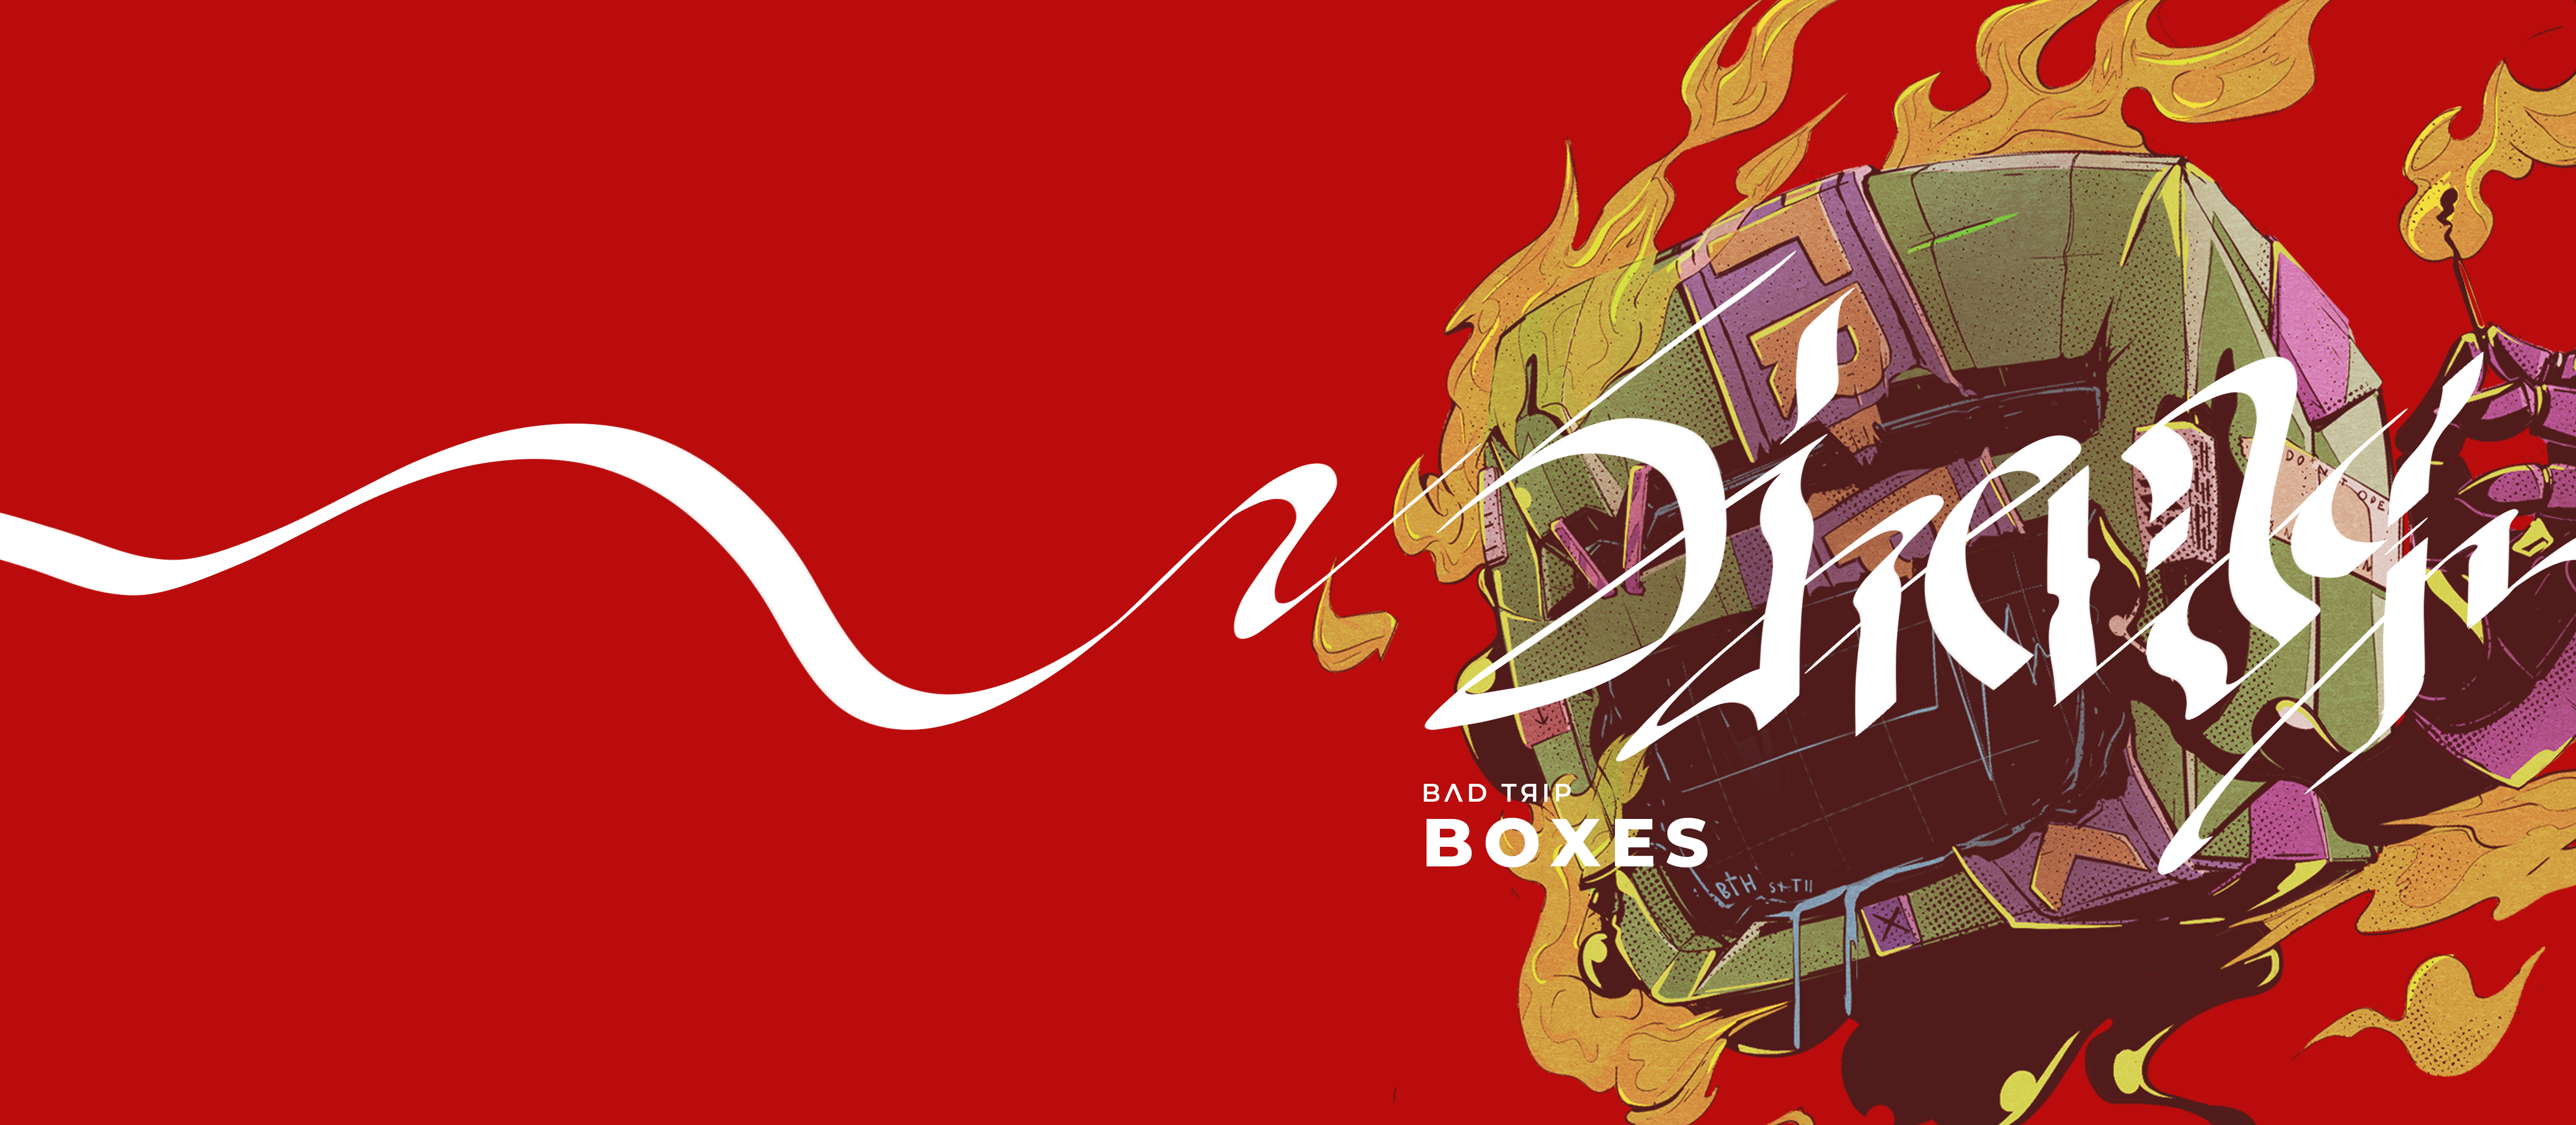 B.T. BOXES banner